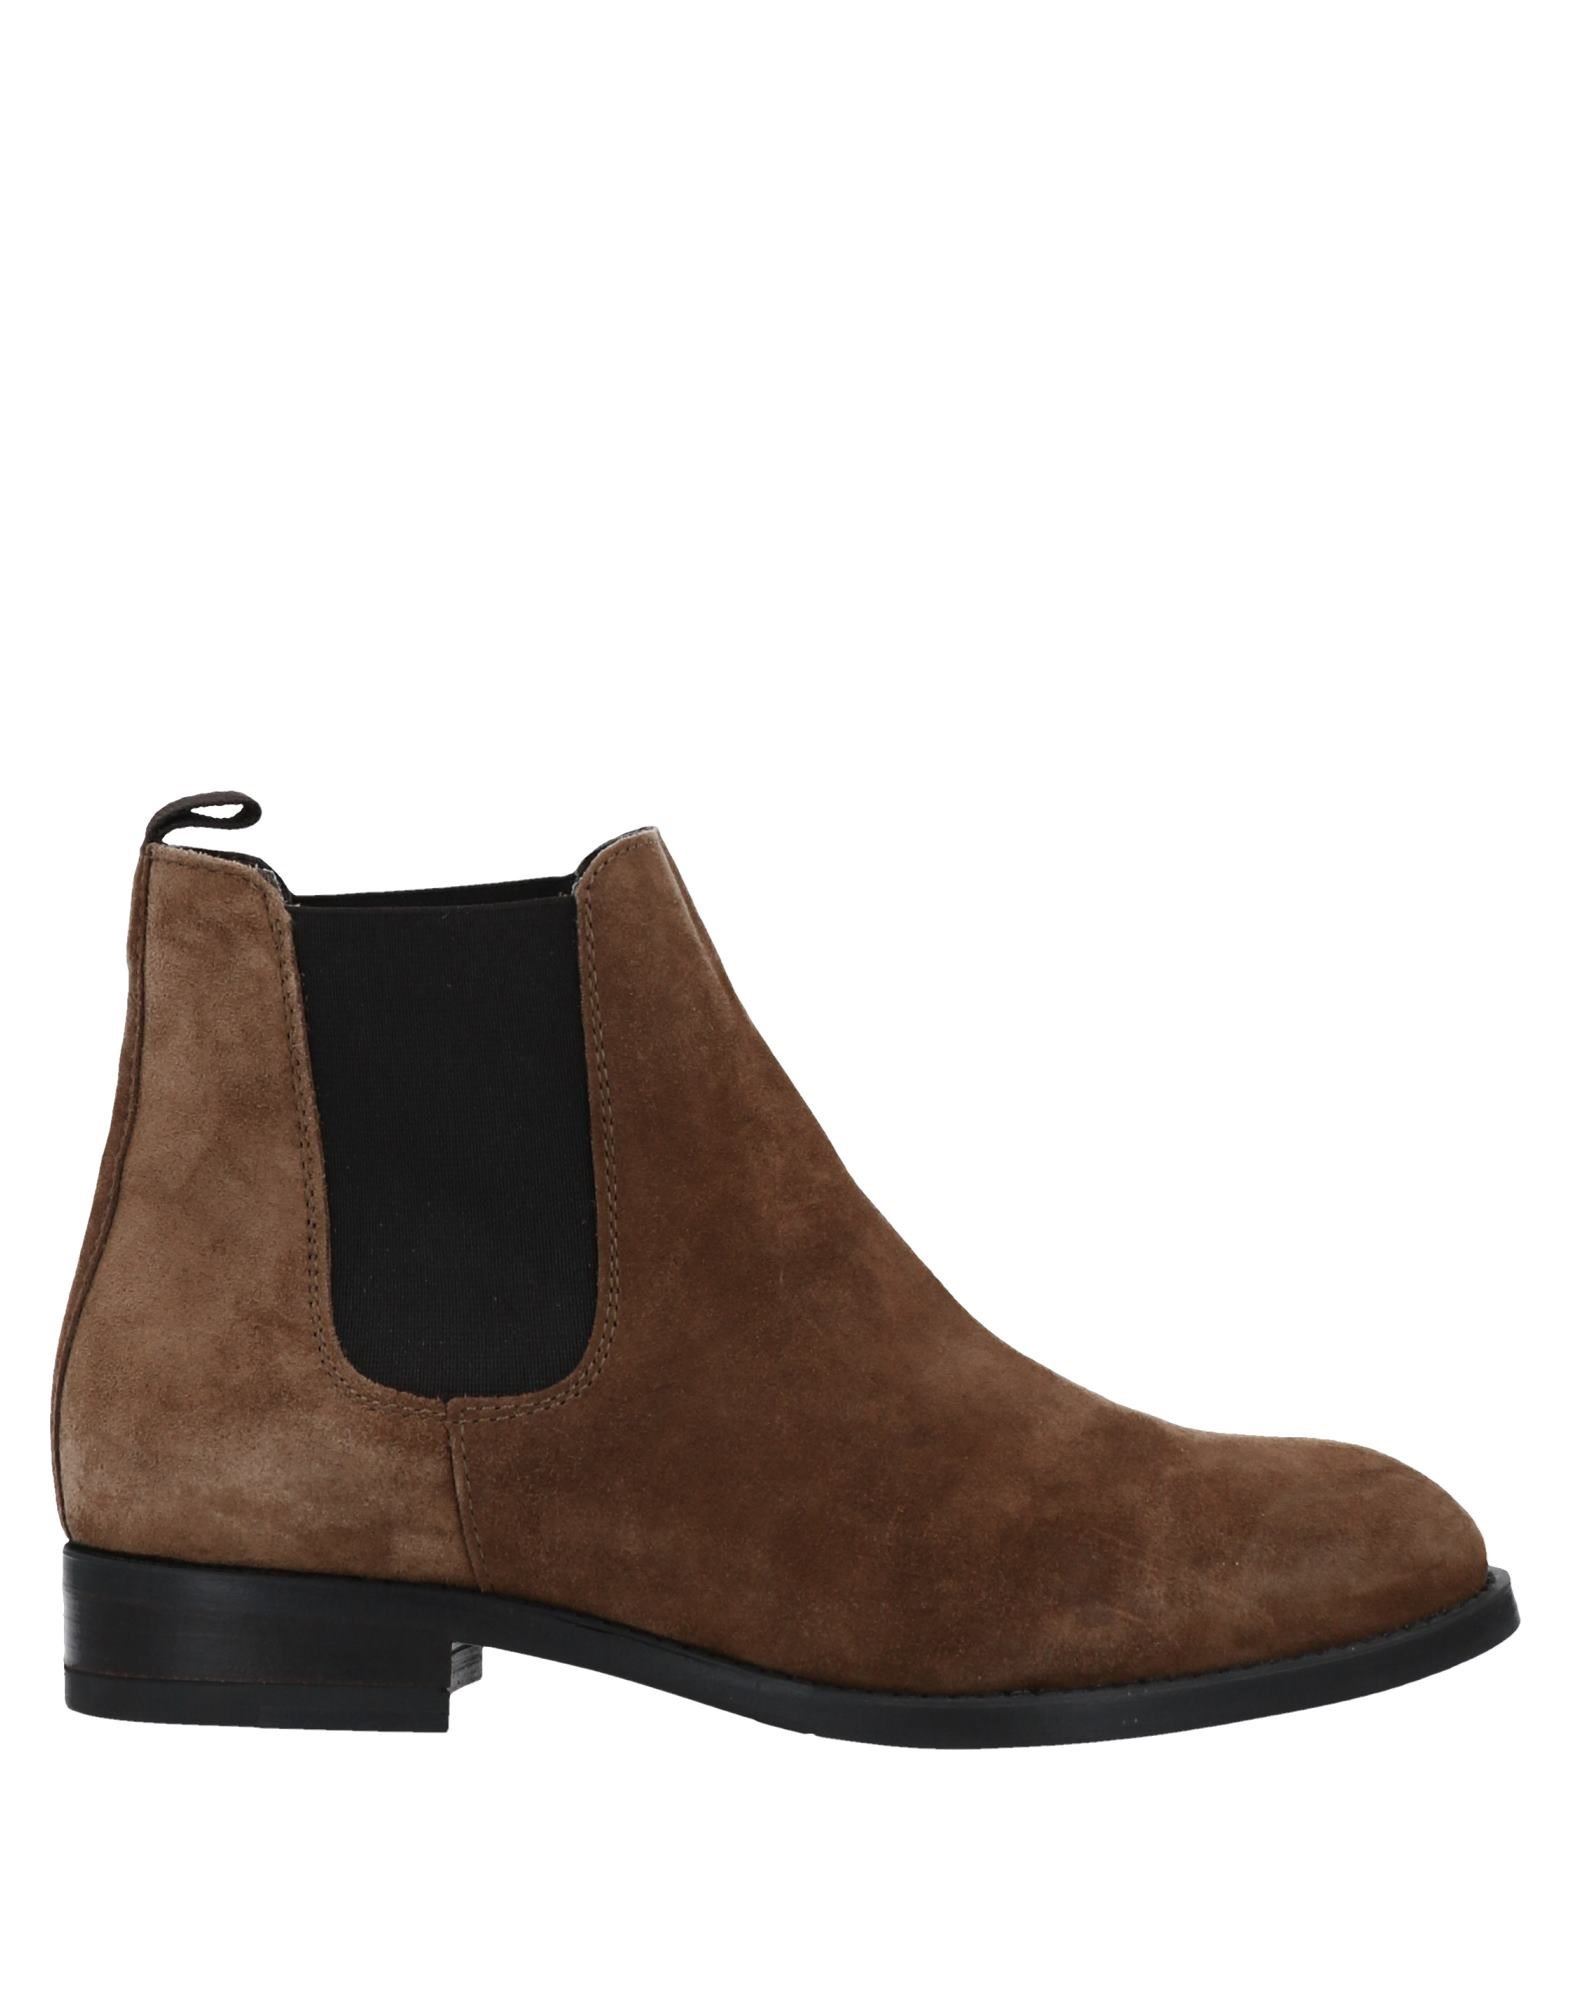 ALPE WOMAN SHOES Ankle boots